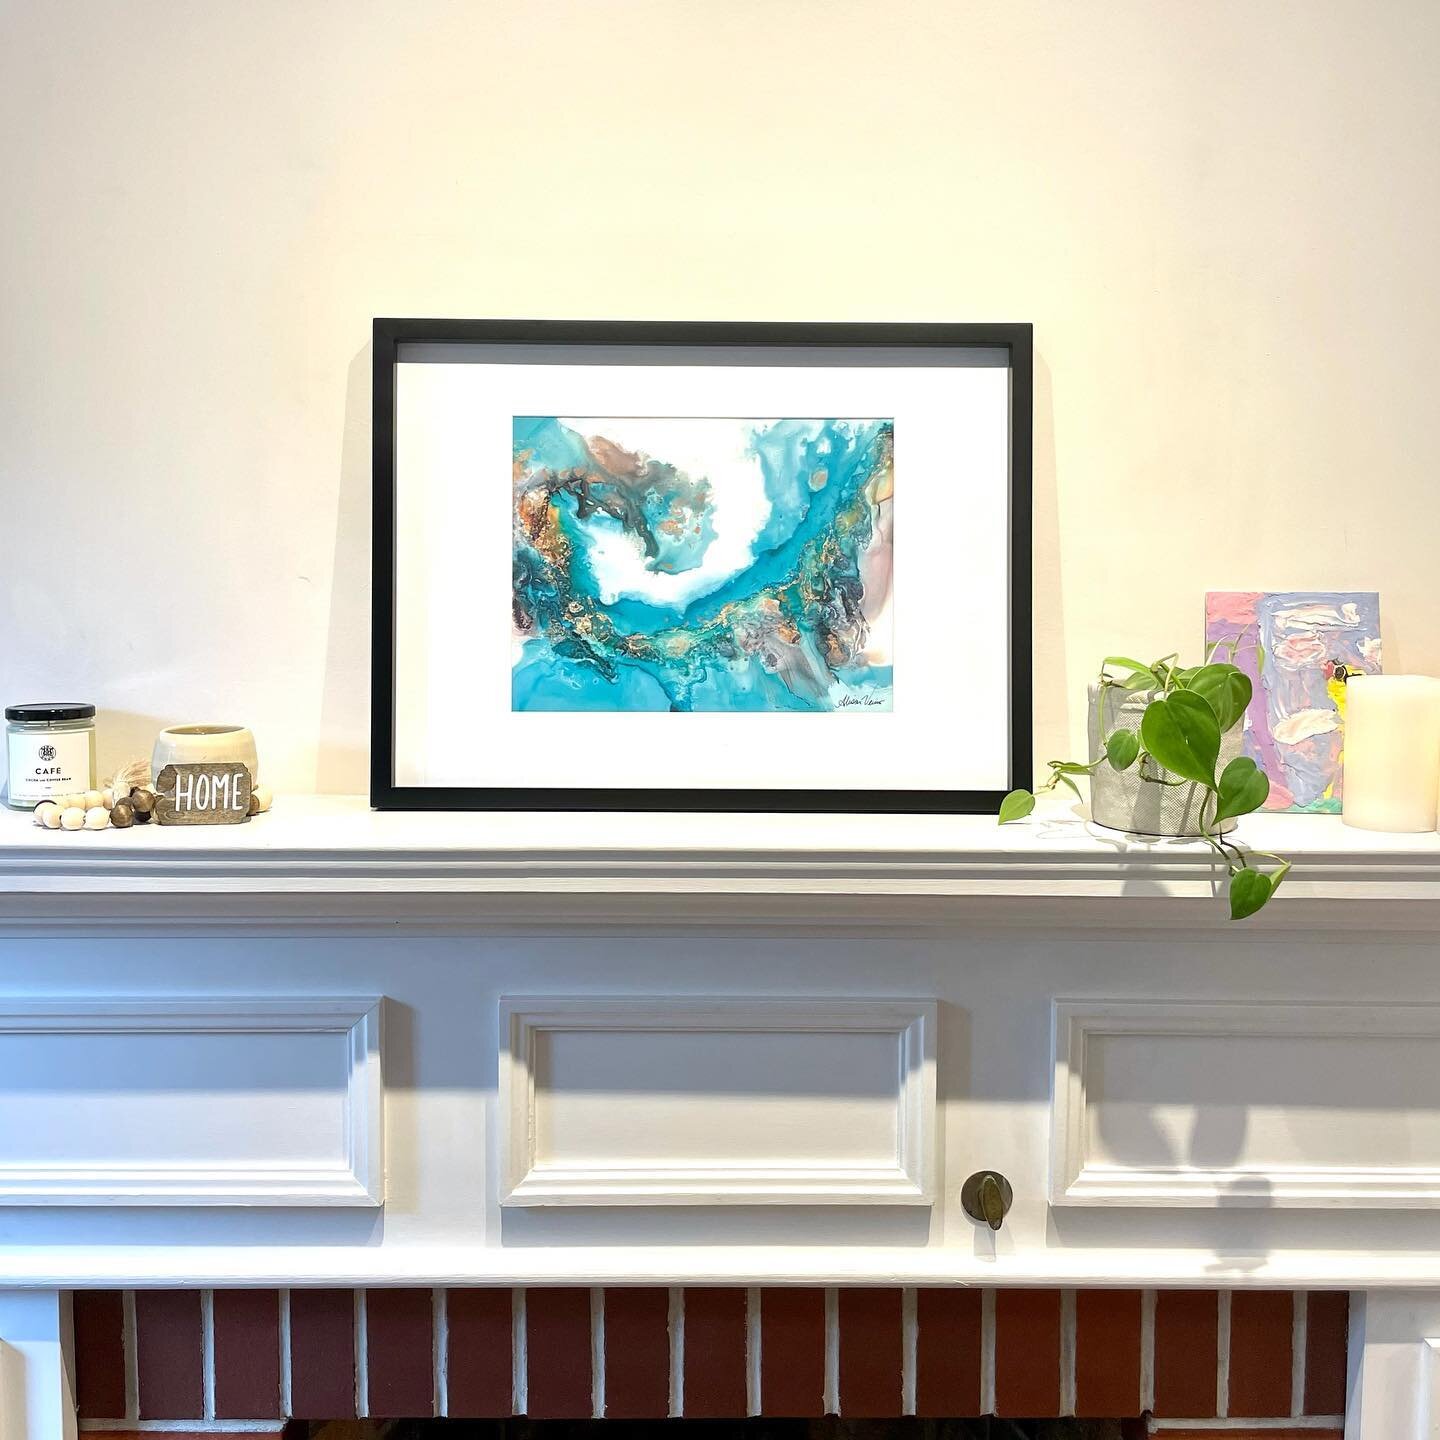 💥&rdquo;Swirling Breeze- Print now available $75💥
Update your space that&rsquo;s missing a little something TODAY 🎉So thrilled with how many details have been captured in this print.  Message me for details or questions. Love the size of this one 